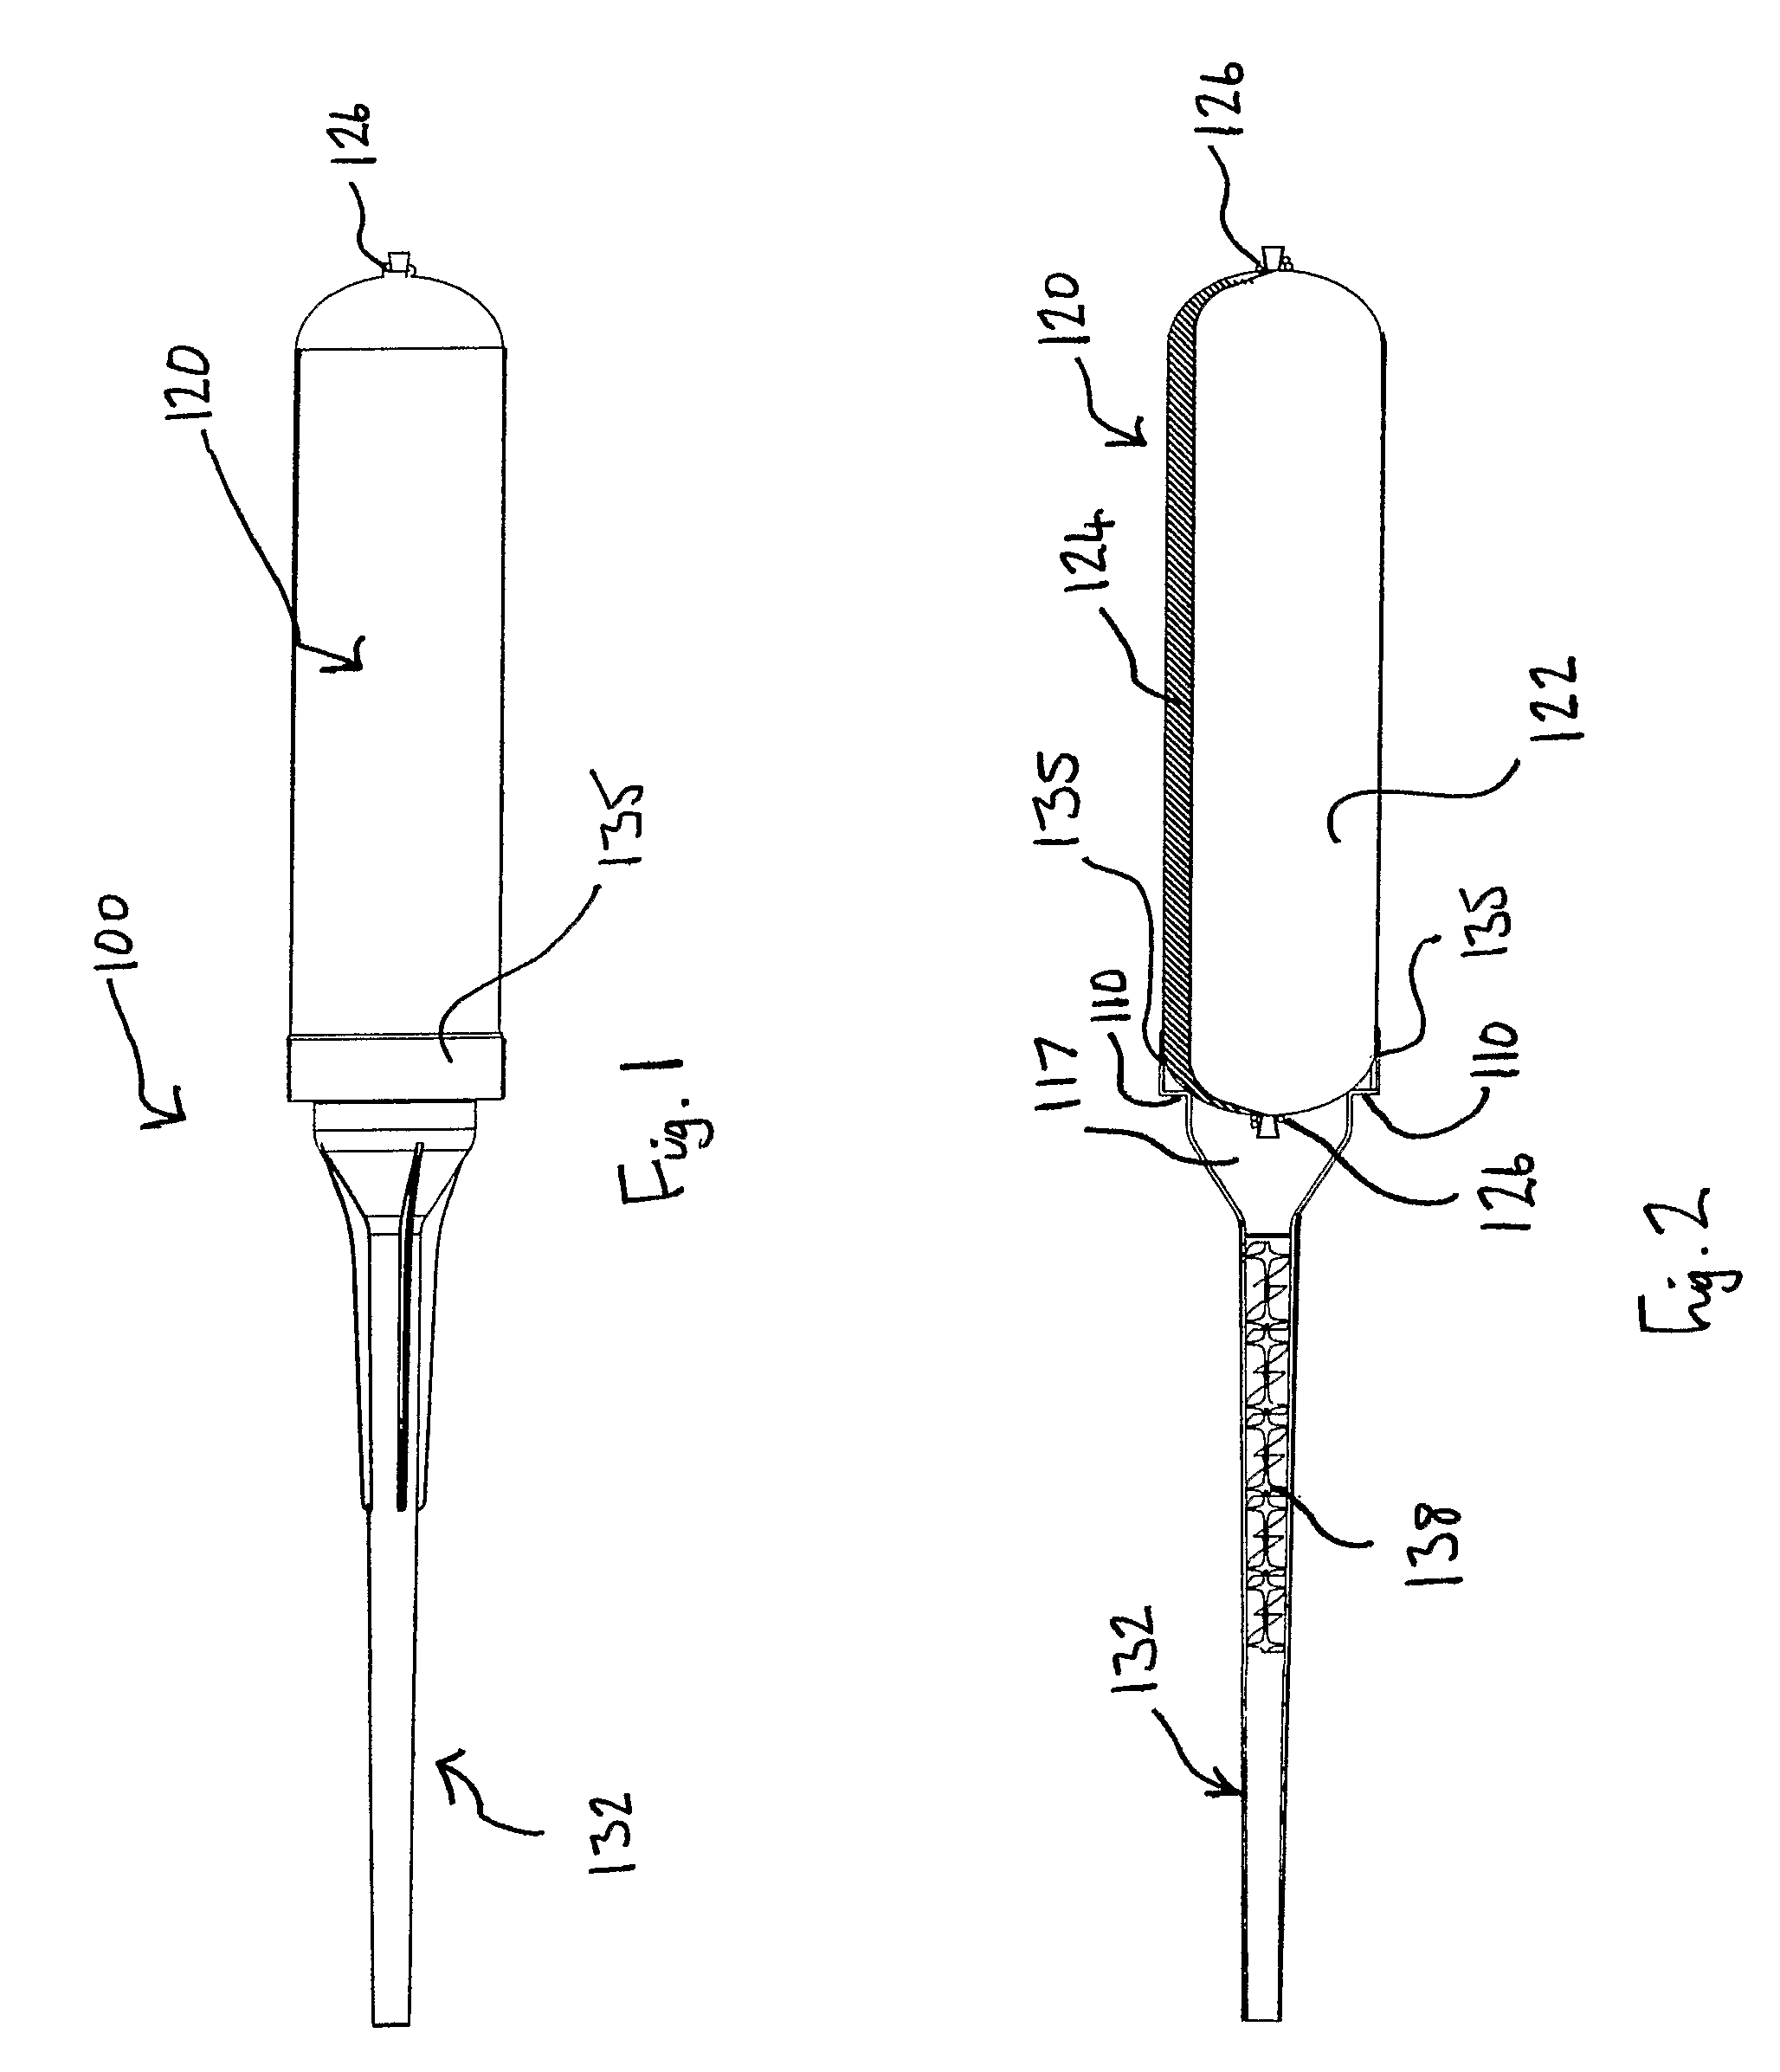 Nozzle and/or adaptor unit on cartridge